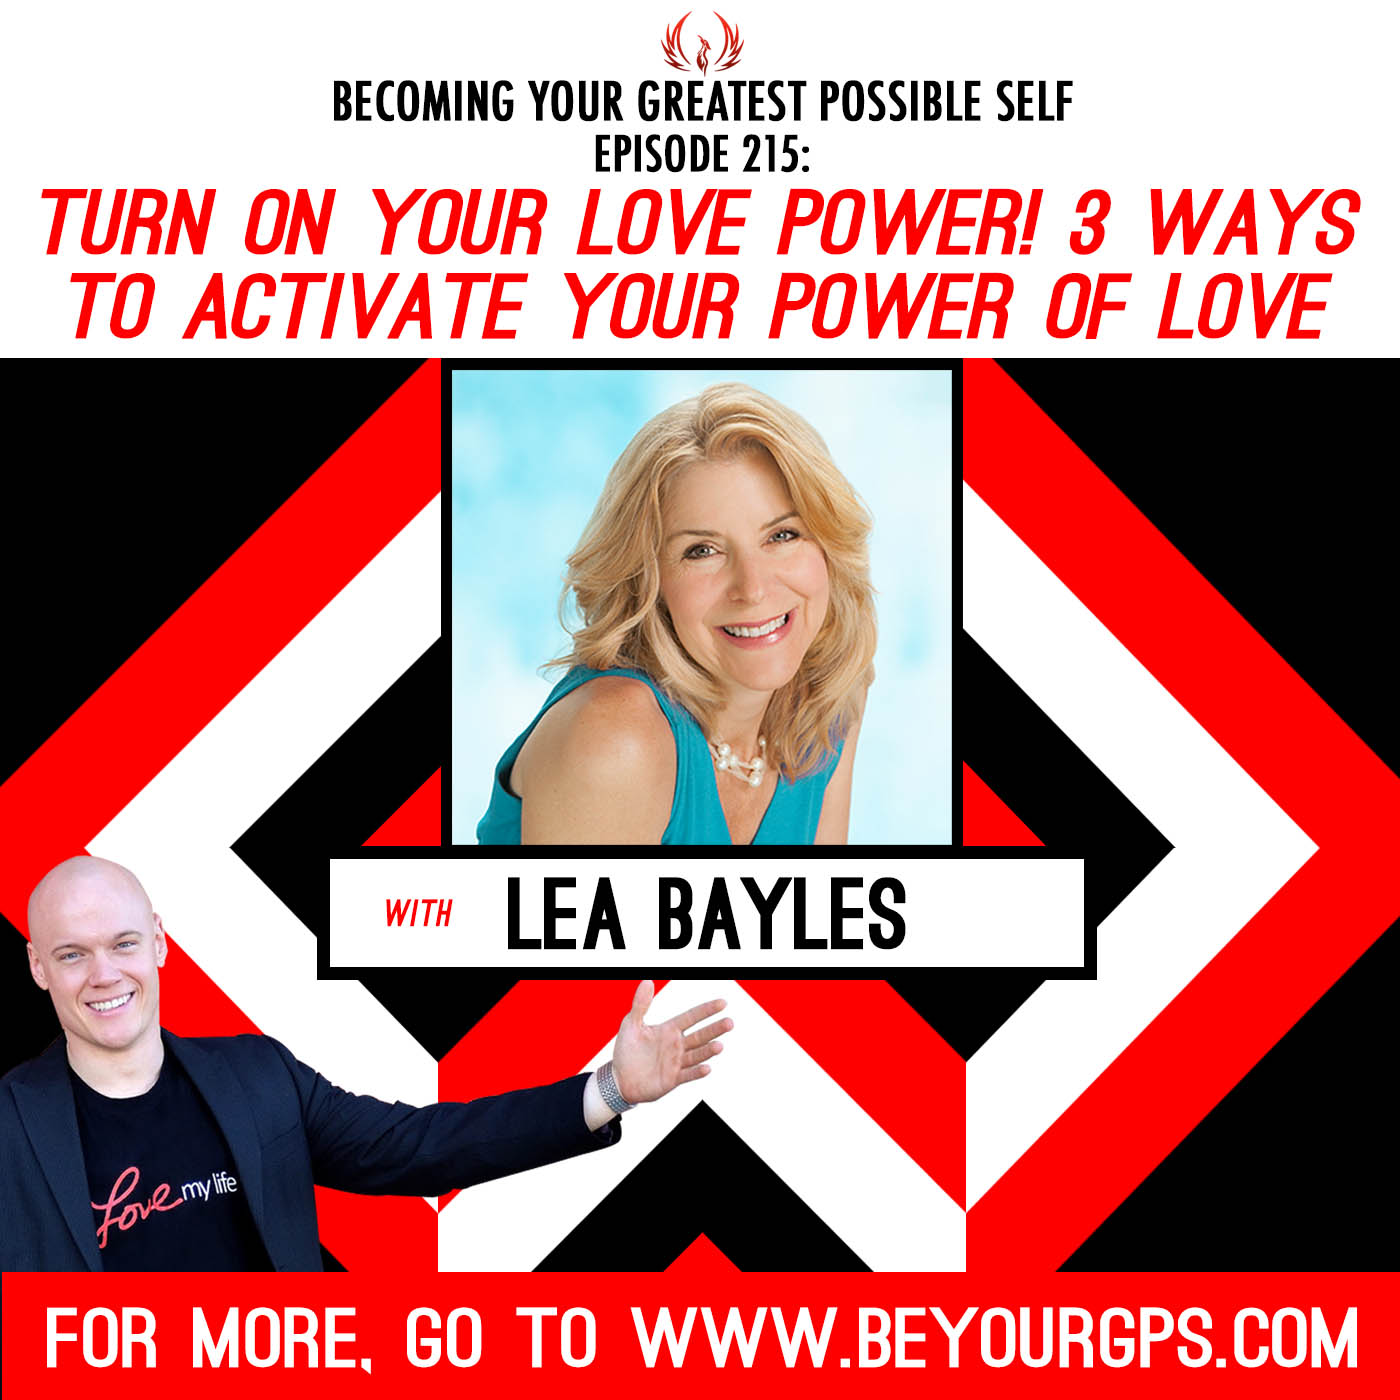 Turn On Your Love Power! 3 Ways To Activate Your Power Of Love With Lea Bayles